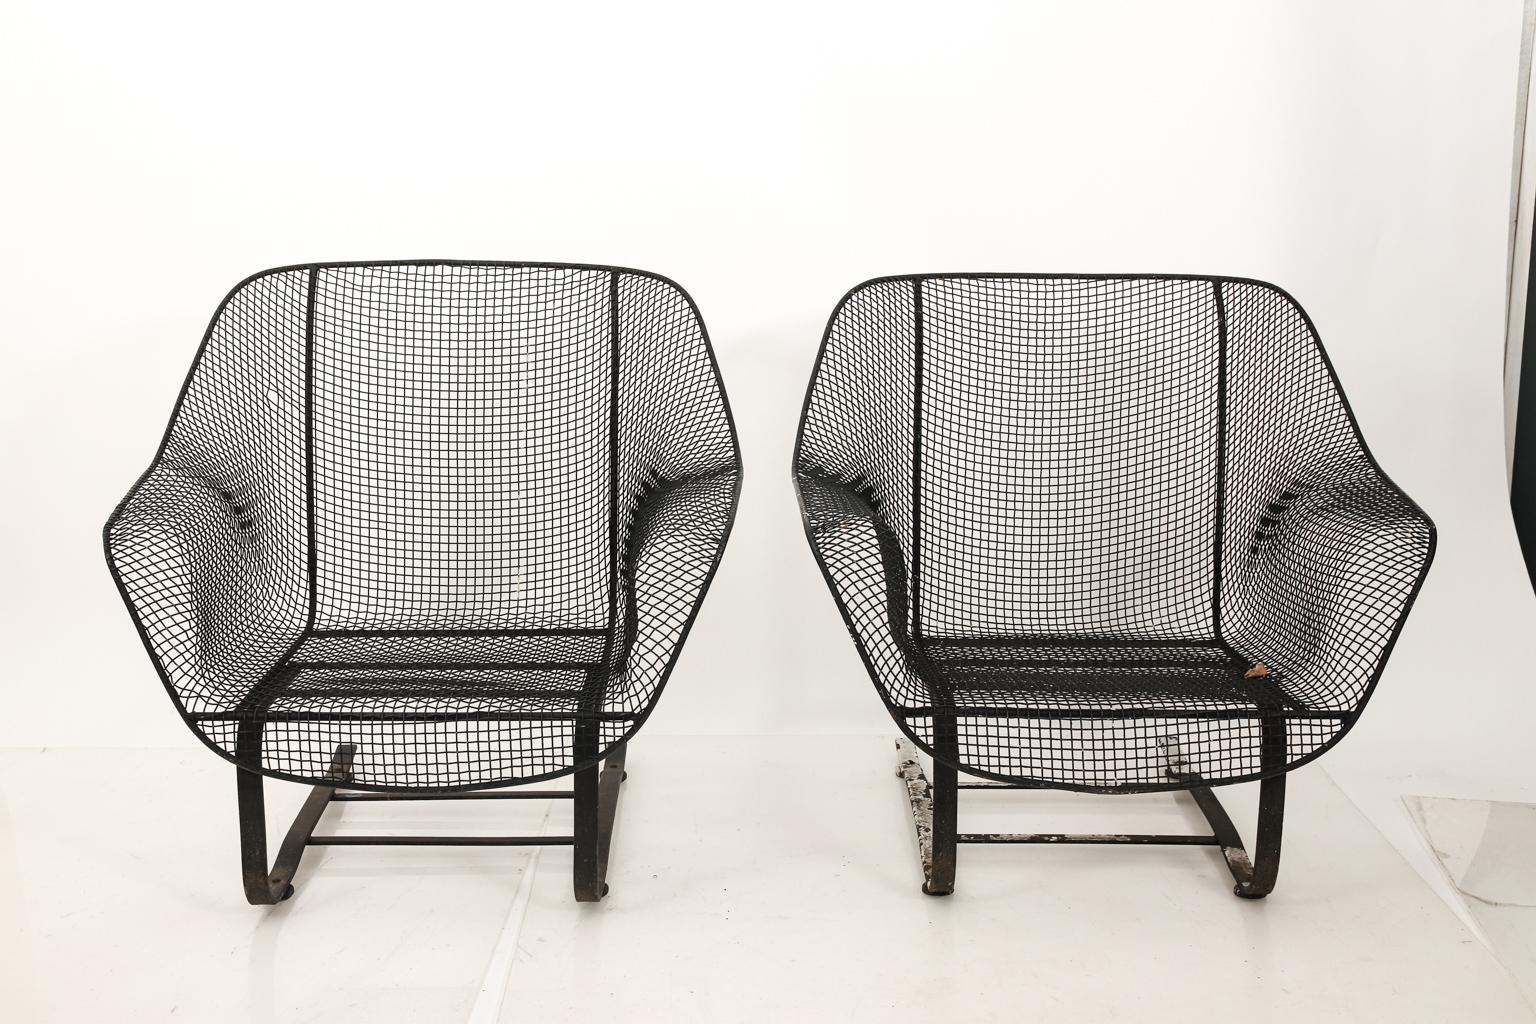 Pair of vintage bouncer chairs by Russell Woodard in the style of Sculptura for garden or outdoor use. The chairs also features wrought iron and metal mesh detail. Please note of wear consistent with age.